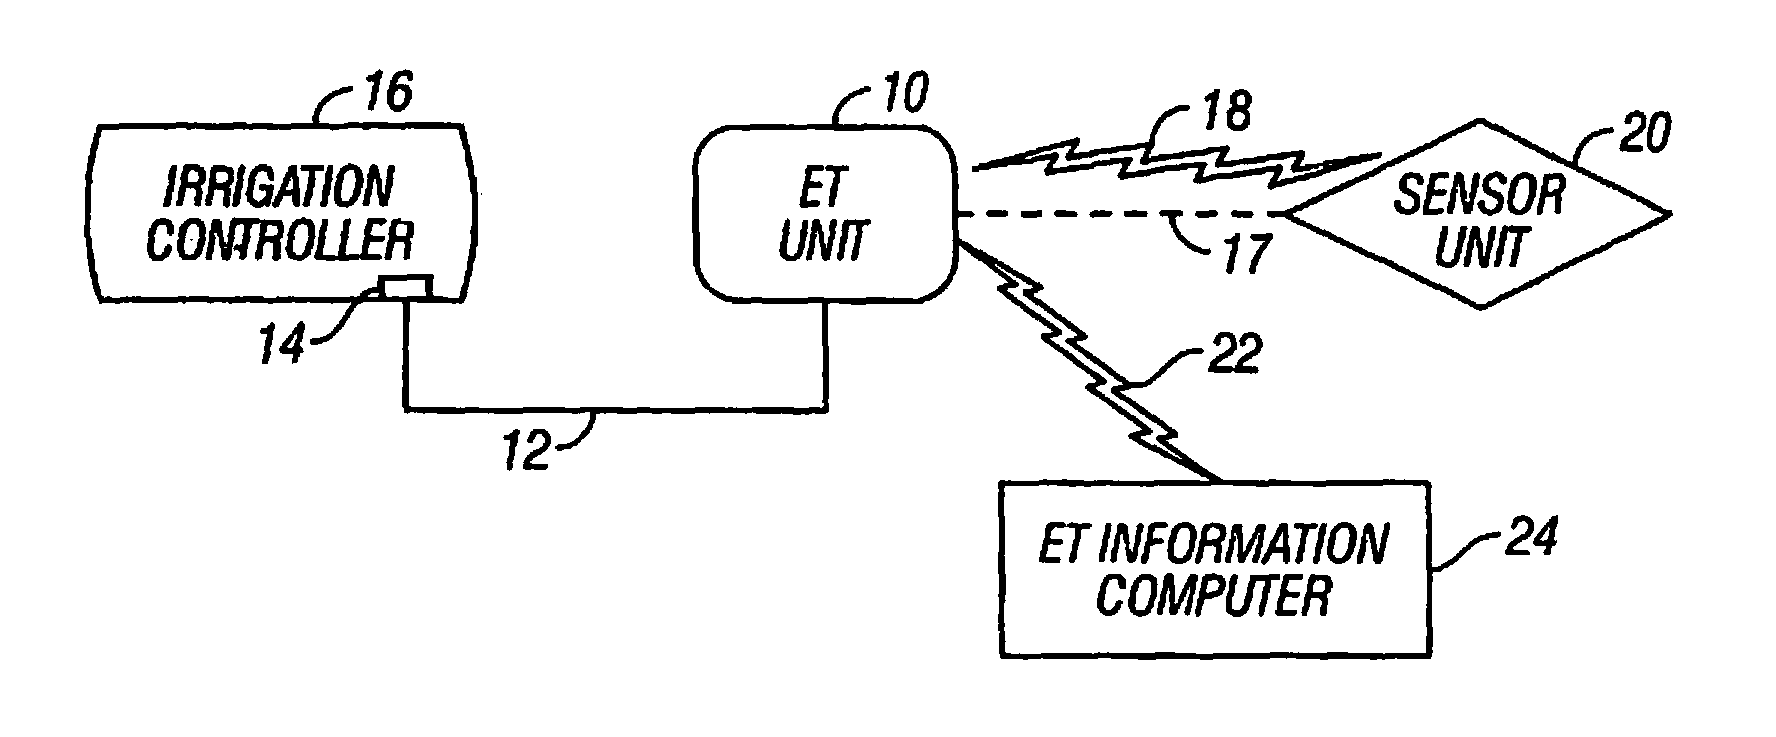 Irrigation system utilizing actual and historical components of ET data